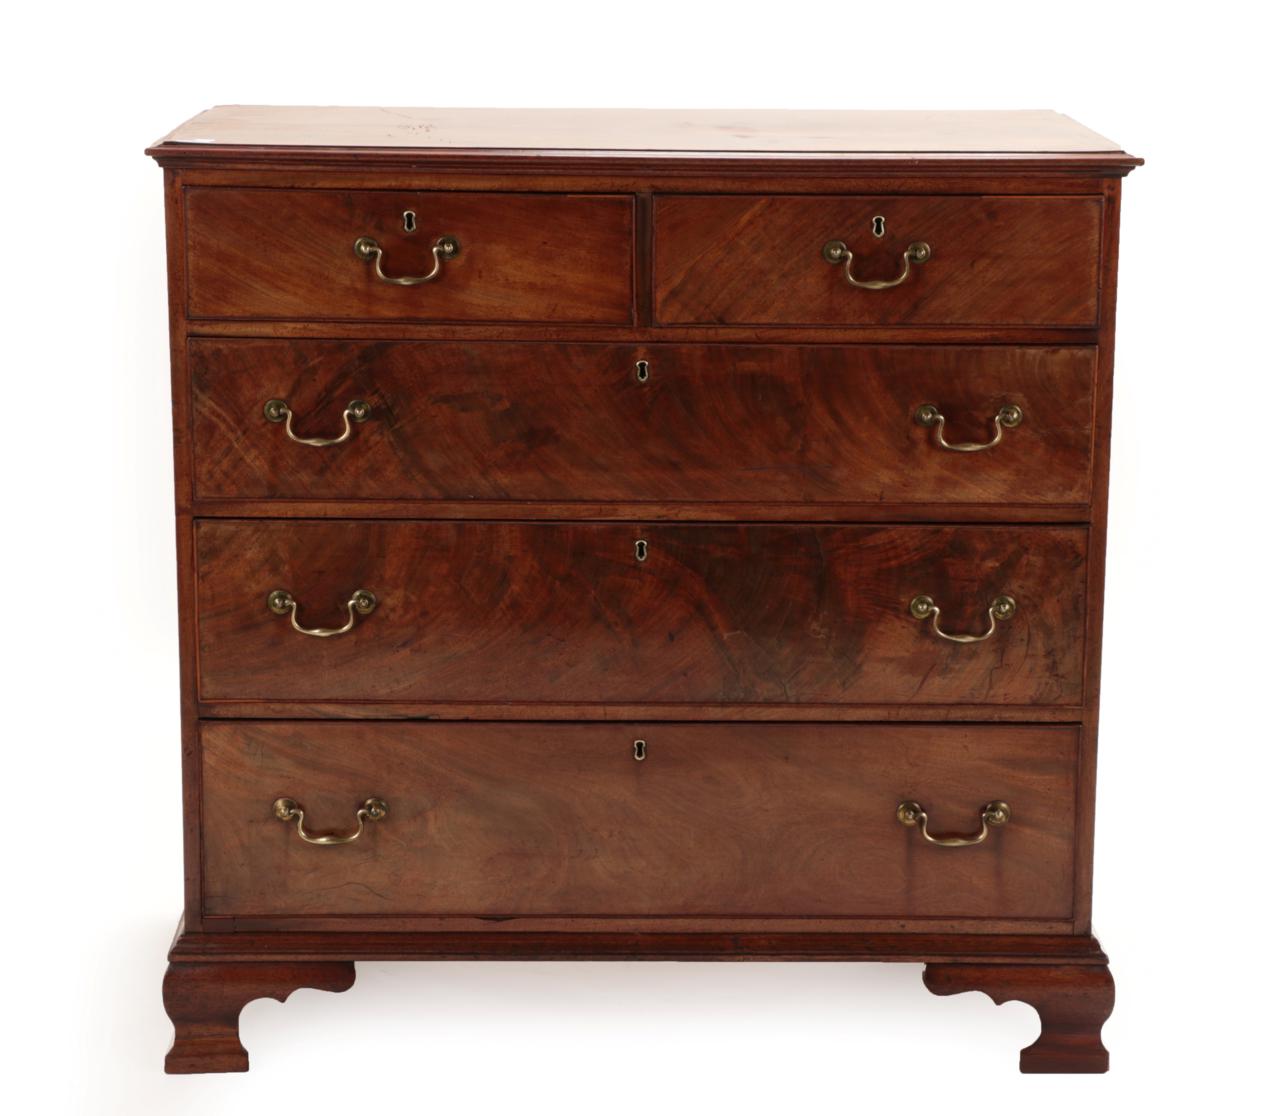 A George III Mahogany and Boxwood Strung Straight Front Chest of Drawers, circa 1800, the moulded